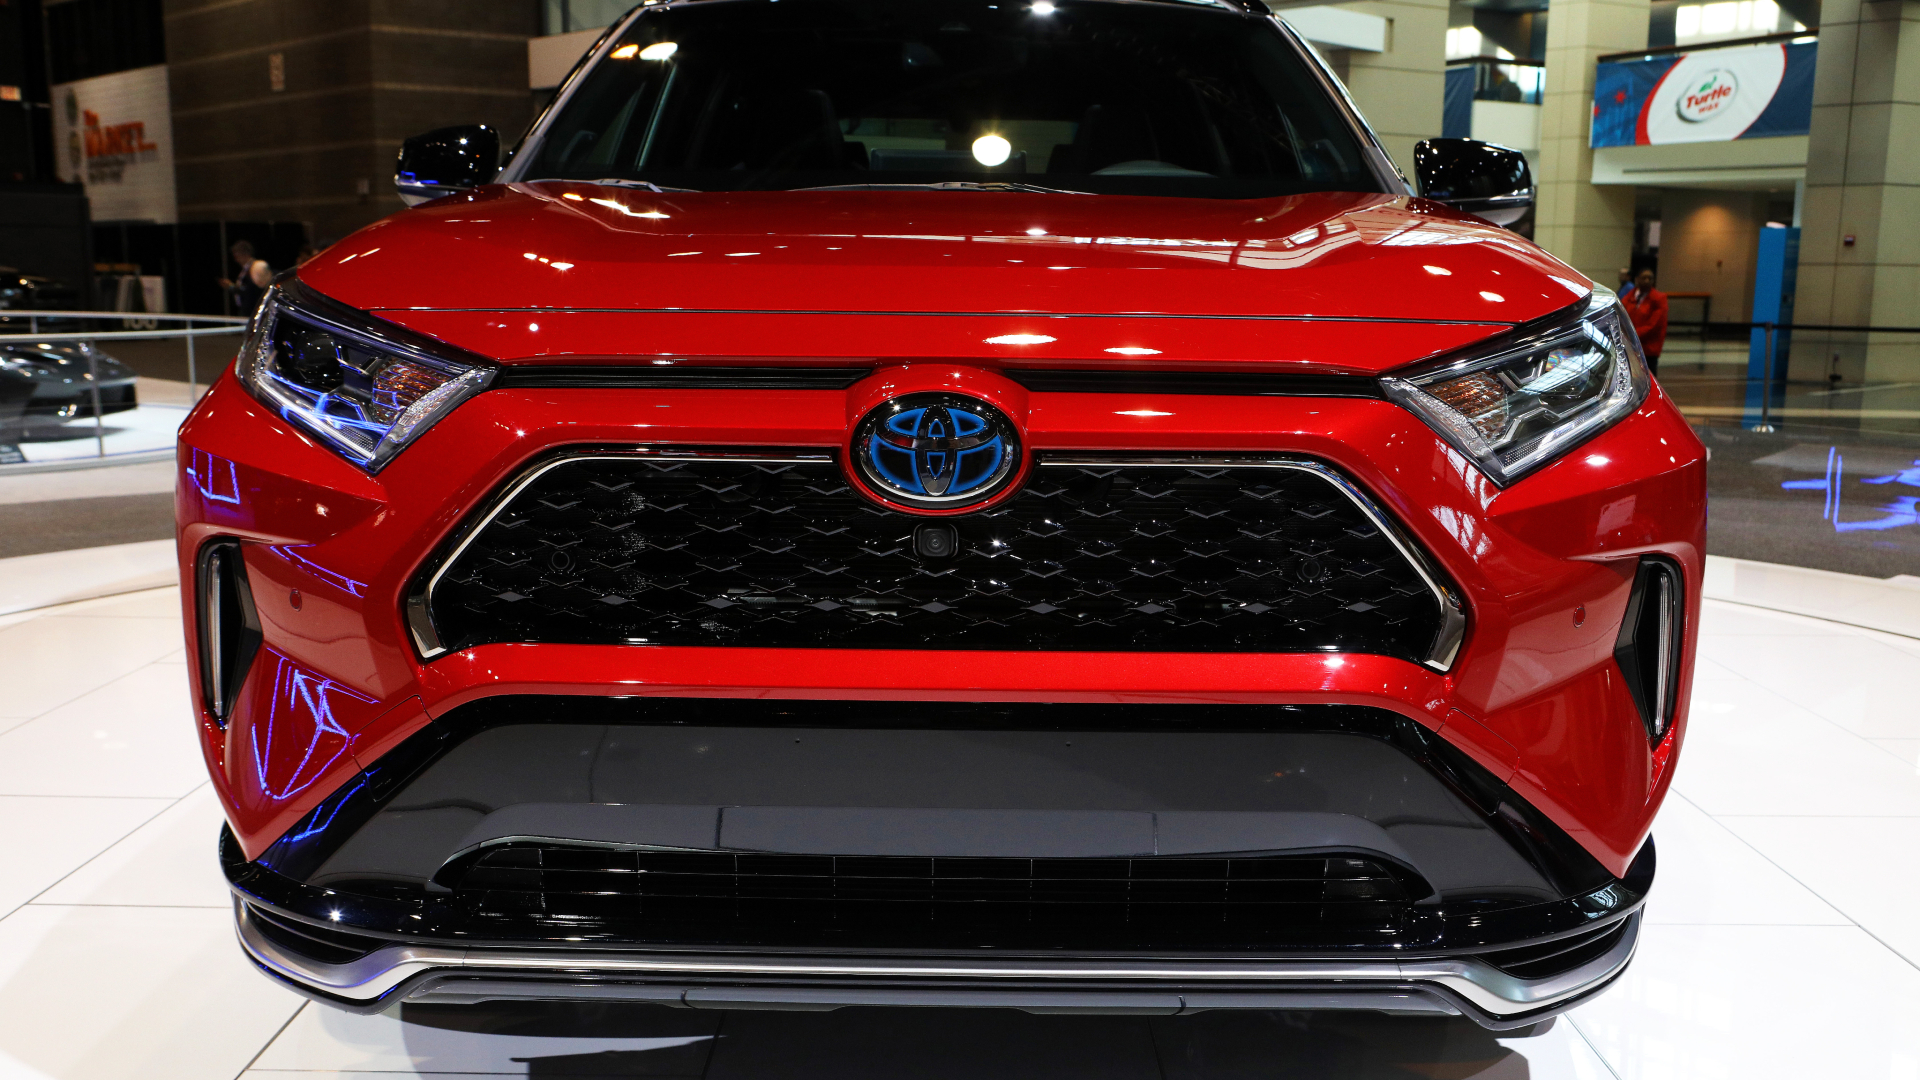 A red Toyta RAV 4 Prime at the 112th Annual Chicago Auto Show at McCormick Place in Chicago, Illinois.